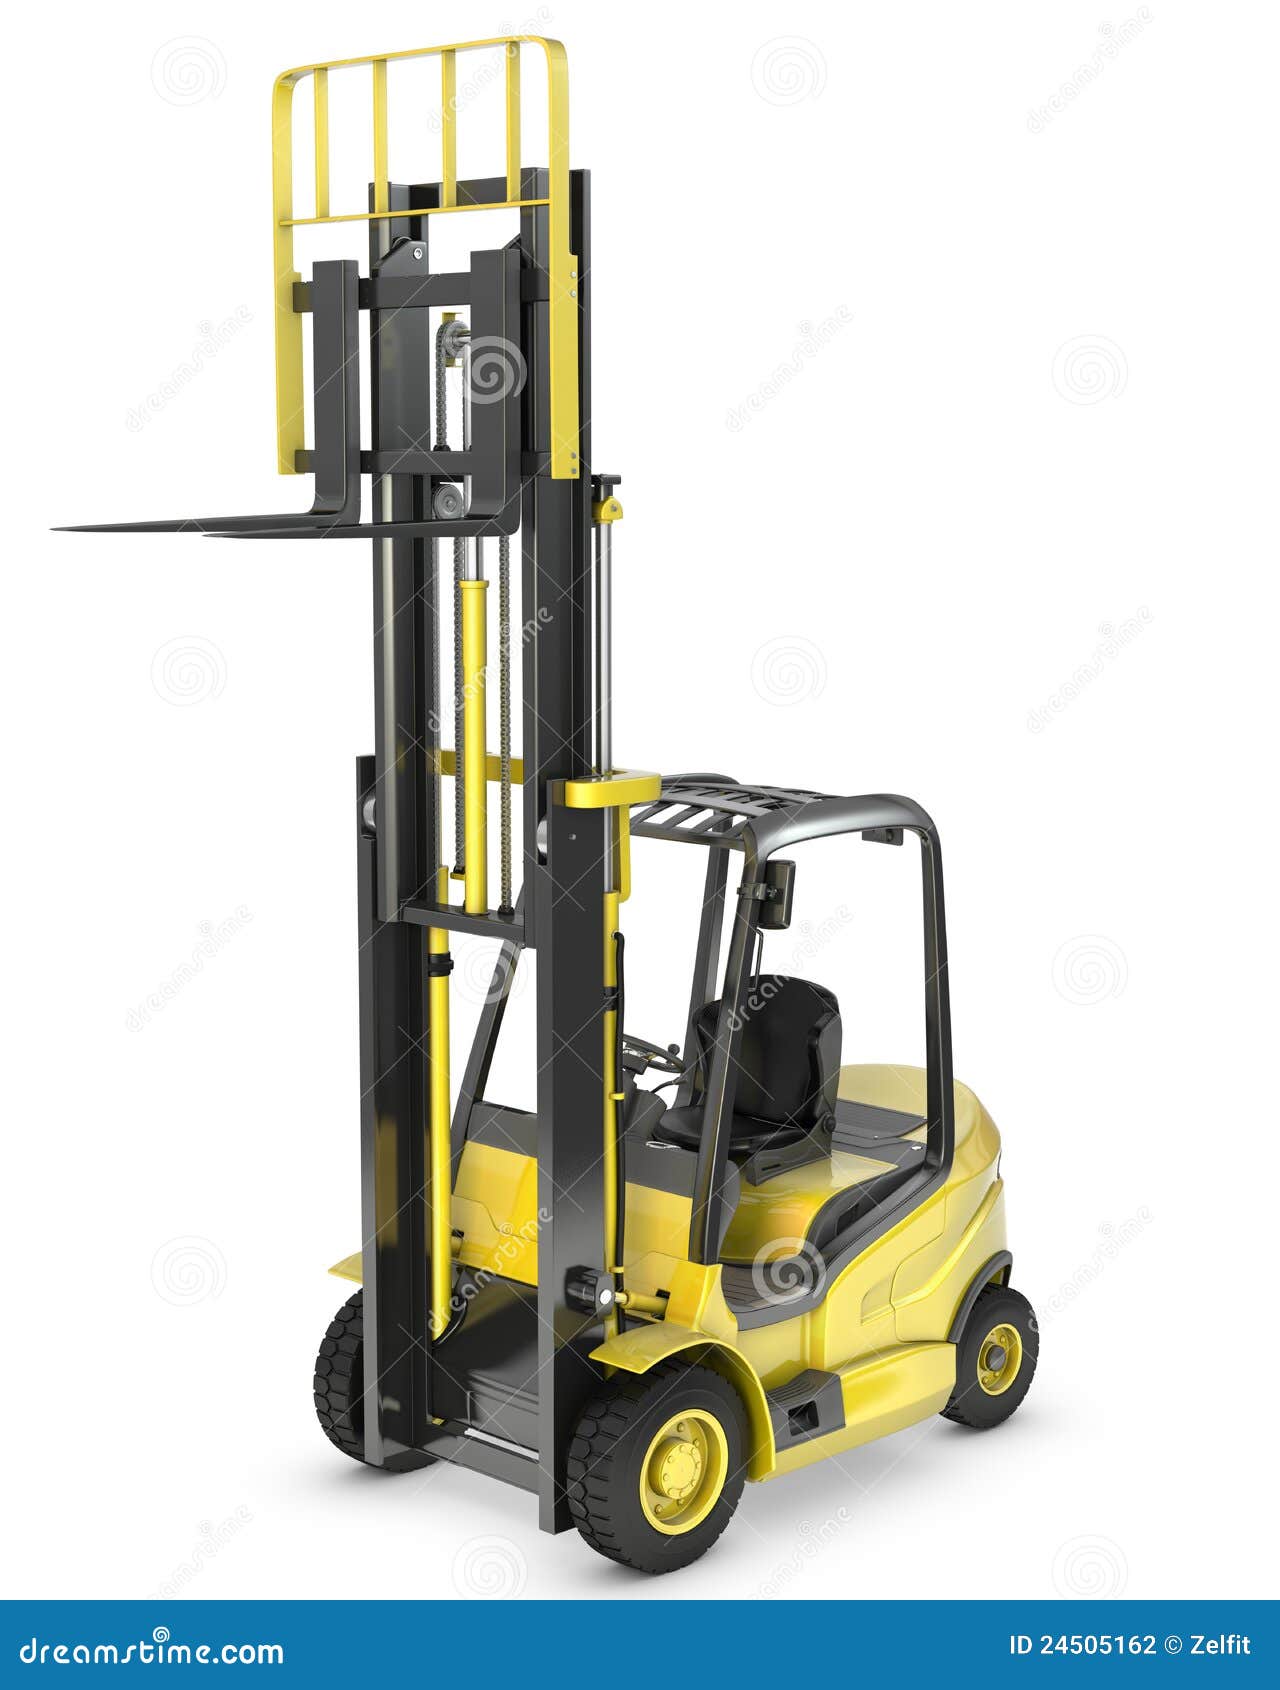 yellow fork lift truck with raised fork